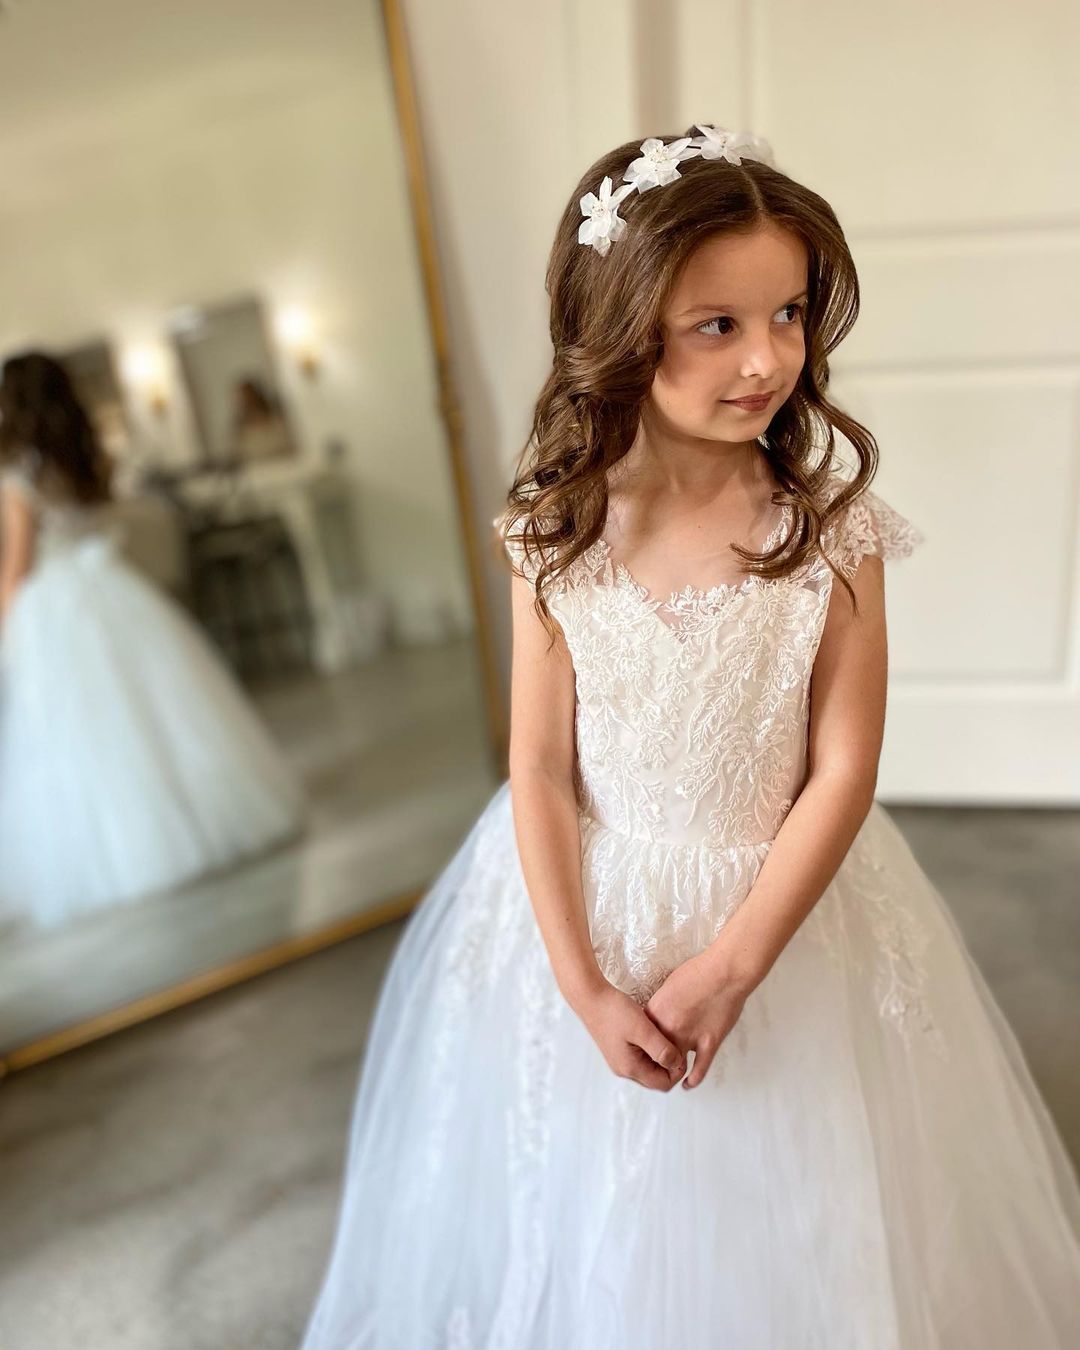 Illusion Sleeves with Pearls A-line First Communion Flower Girl Dress 3018  | Girls dresses, Flower girl dresses, Kids dress